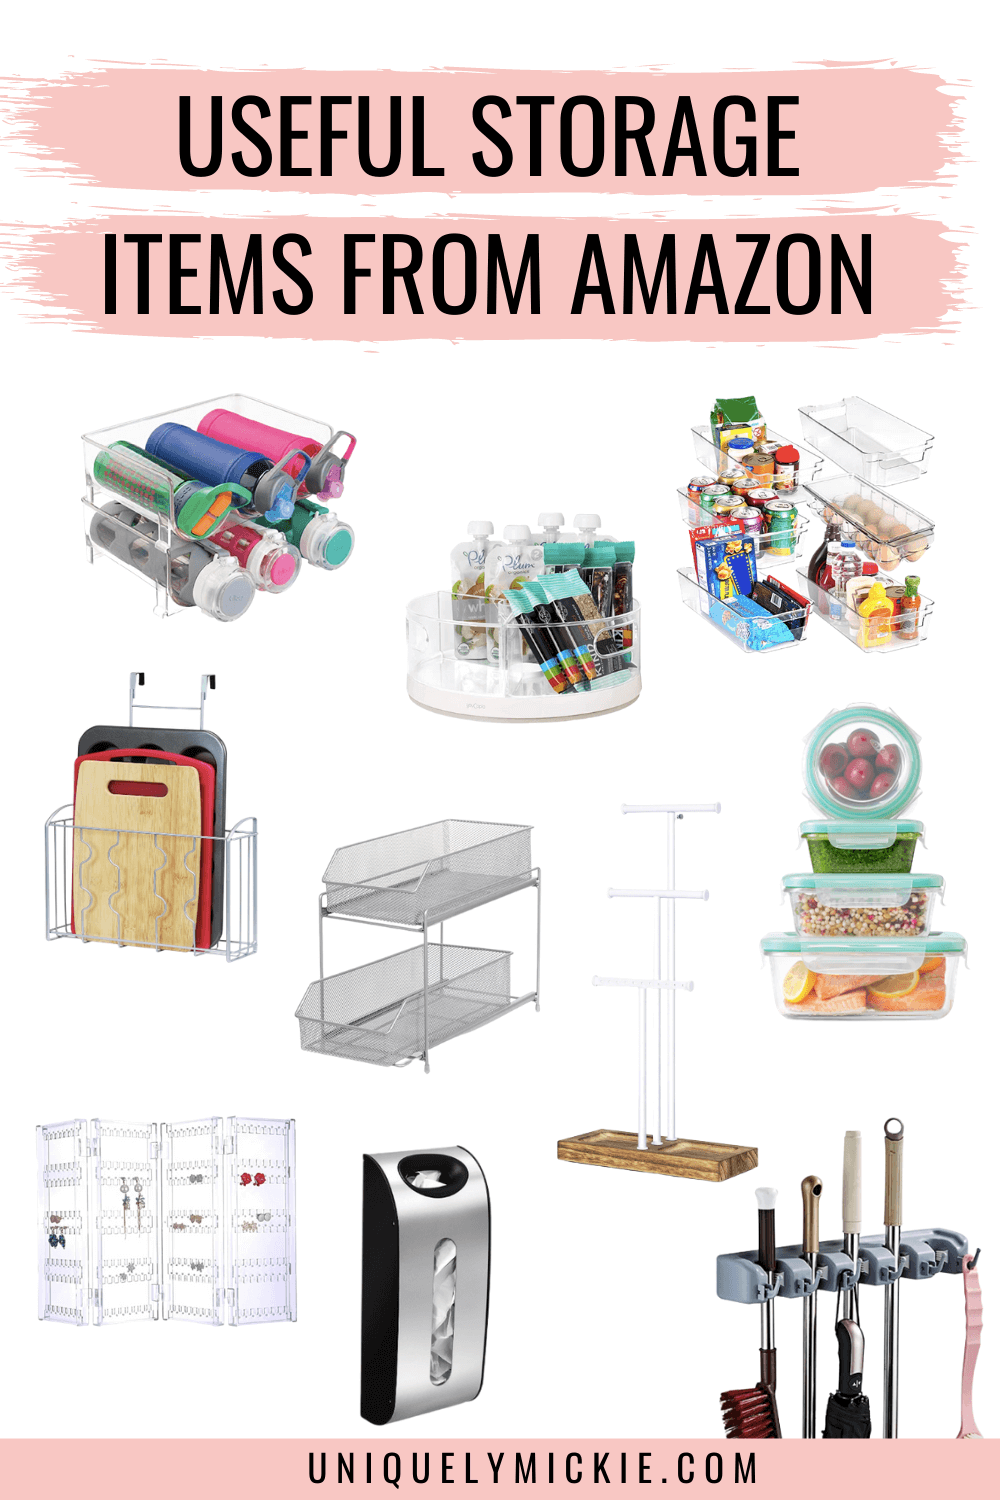 My favorite part of the spring season is the spring refresh and re-organization that people tend to do. If you’re looking for some great organization finds from Amazon, then you clicked on the right blog post. In today’s post, I’m sharing my favorite organization finds from Amazon!